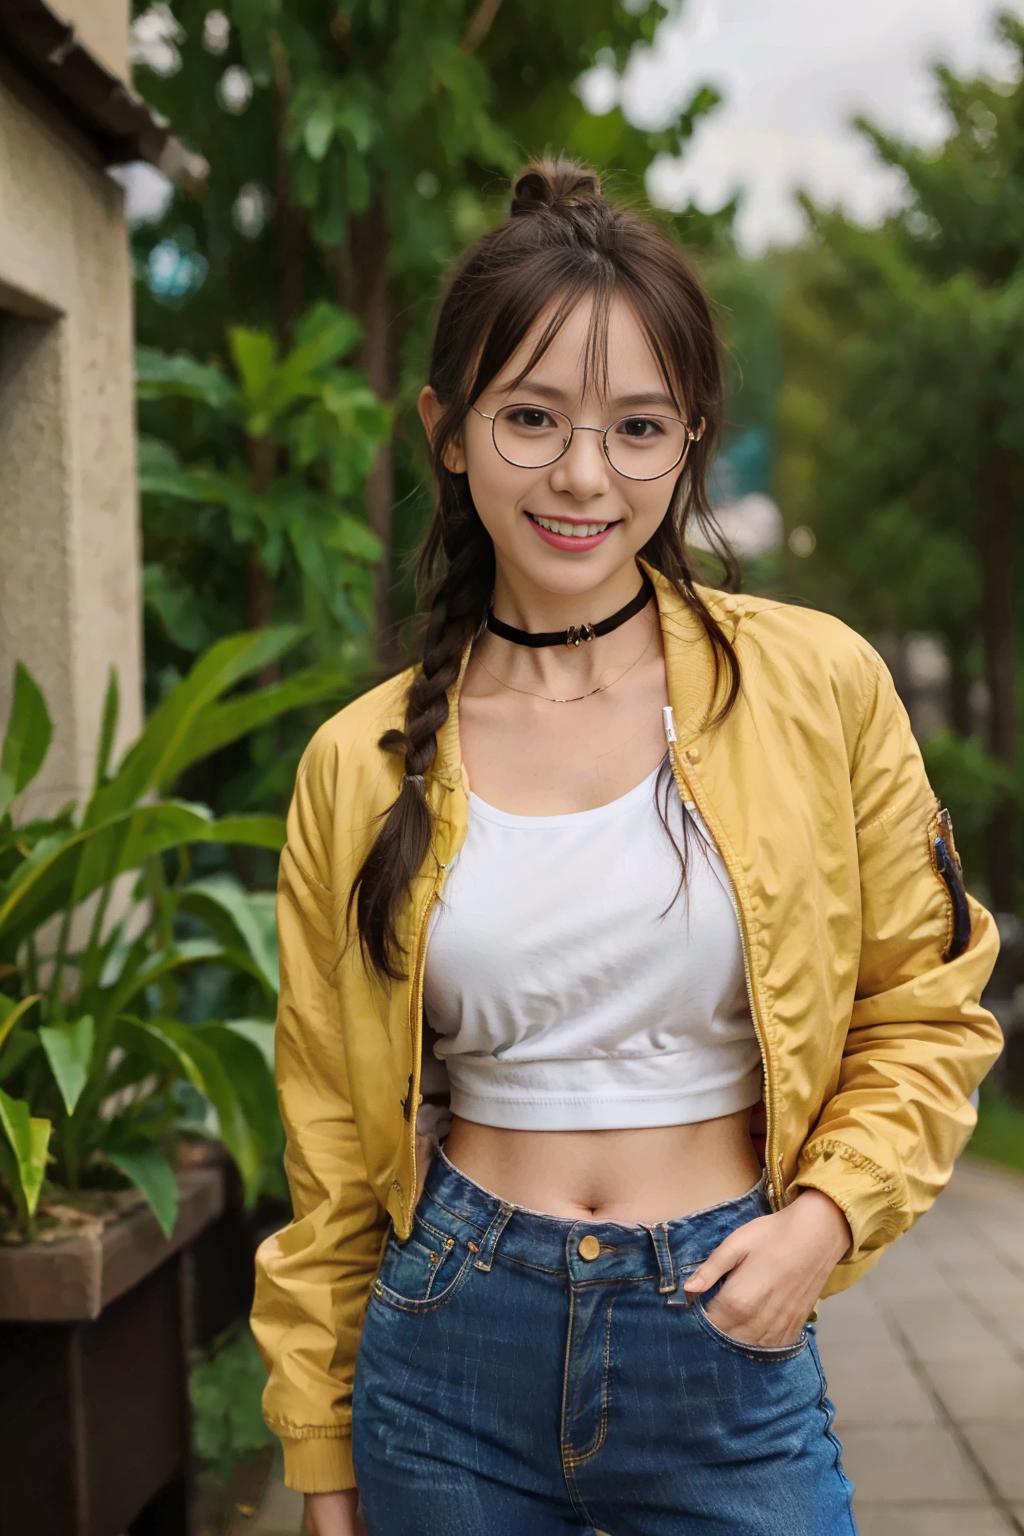 A young woman with glasses wearing a yellow jacket and denim shorts.